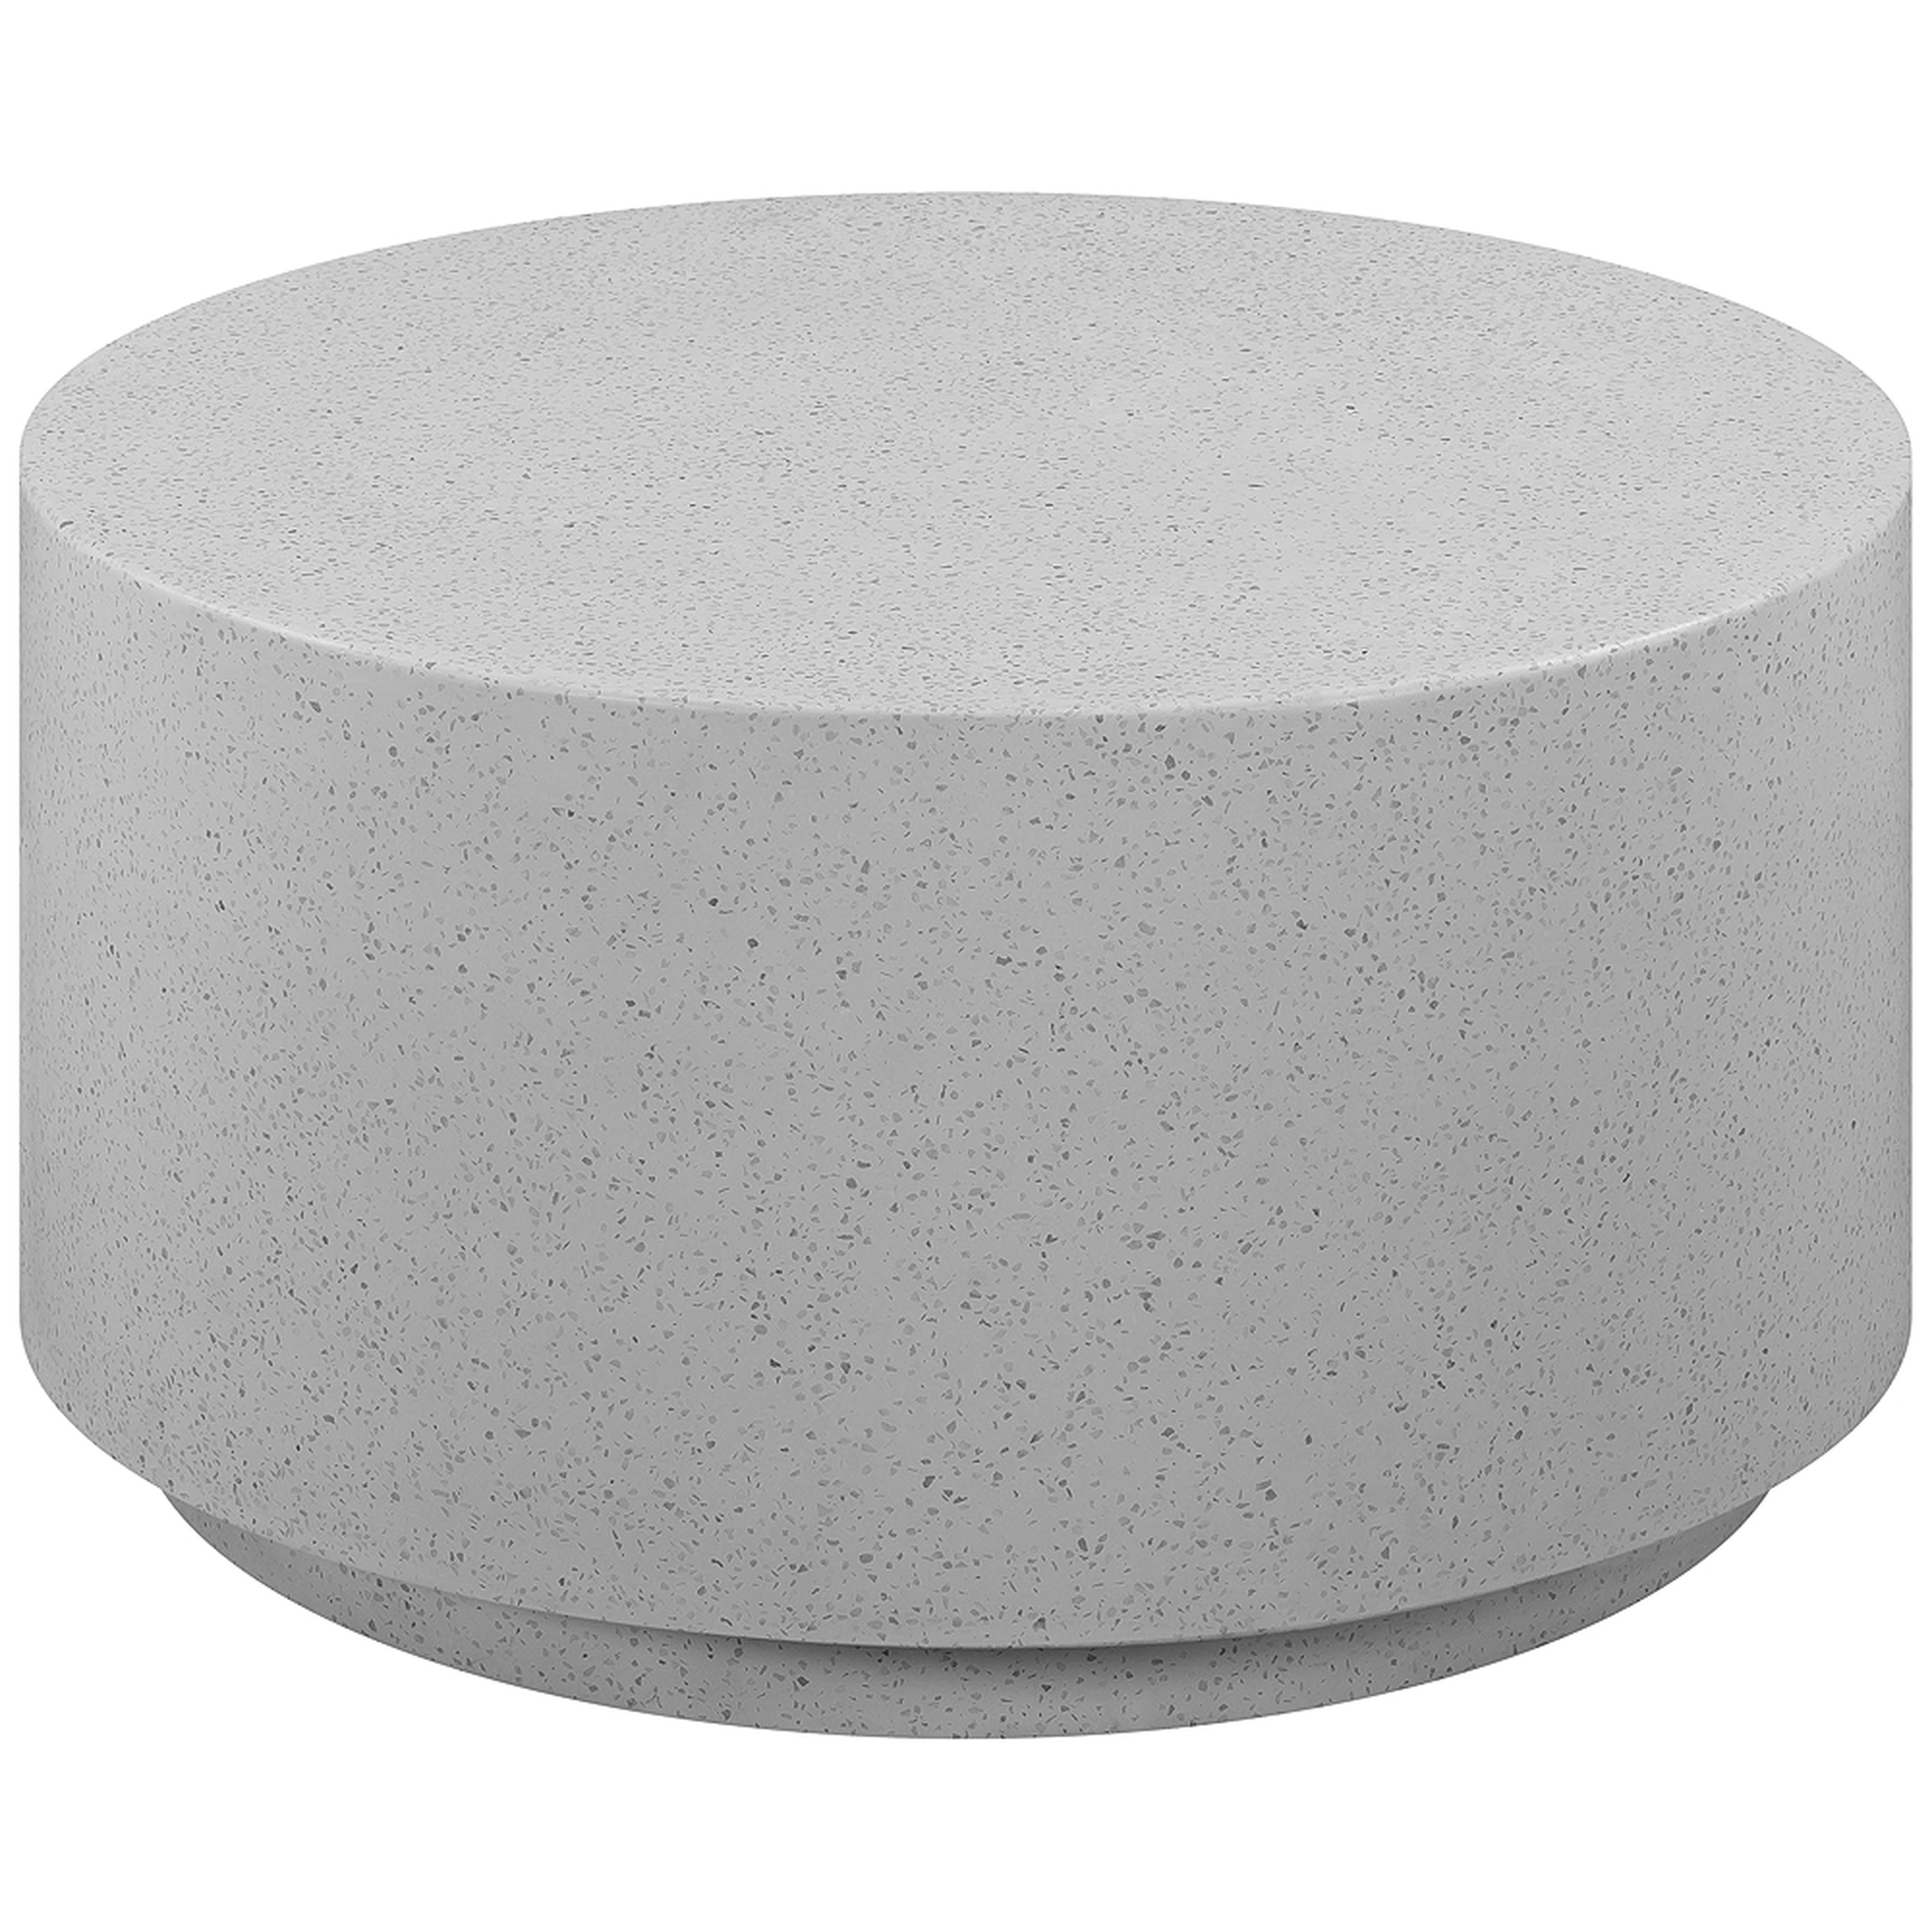 Terrazzo 27 1/2"W Light Speckled Concrete Round Coffee Table - Style # 80P55 - Lamps Plus